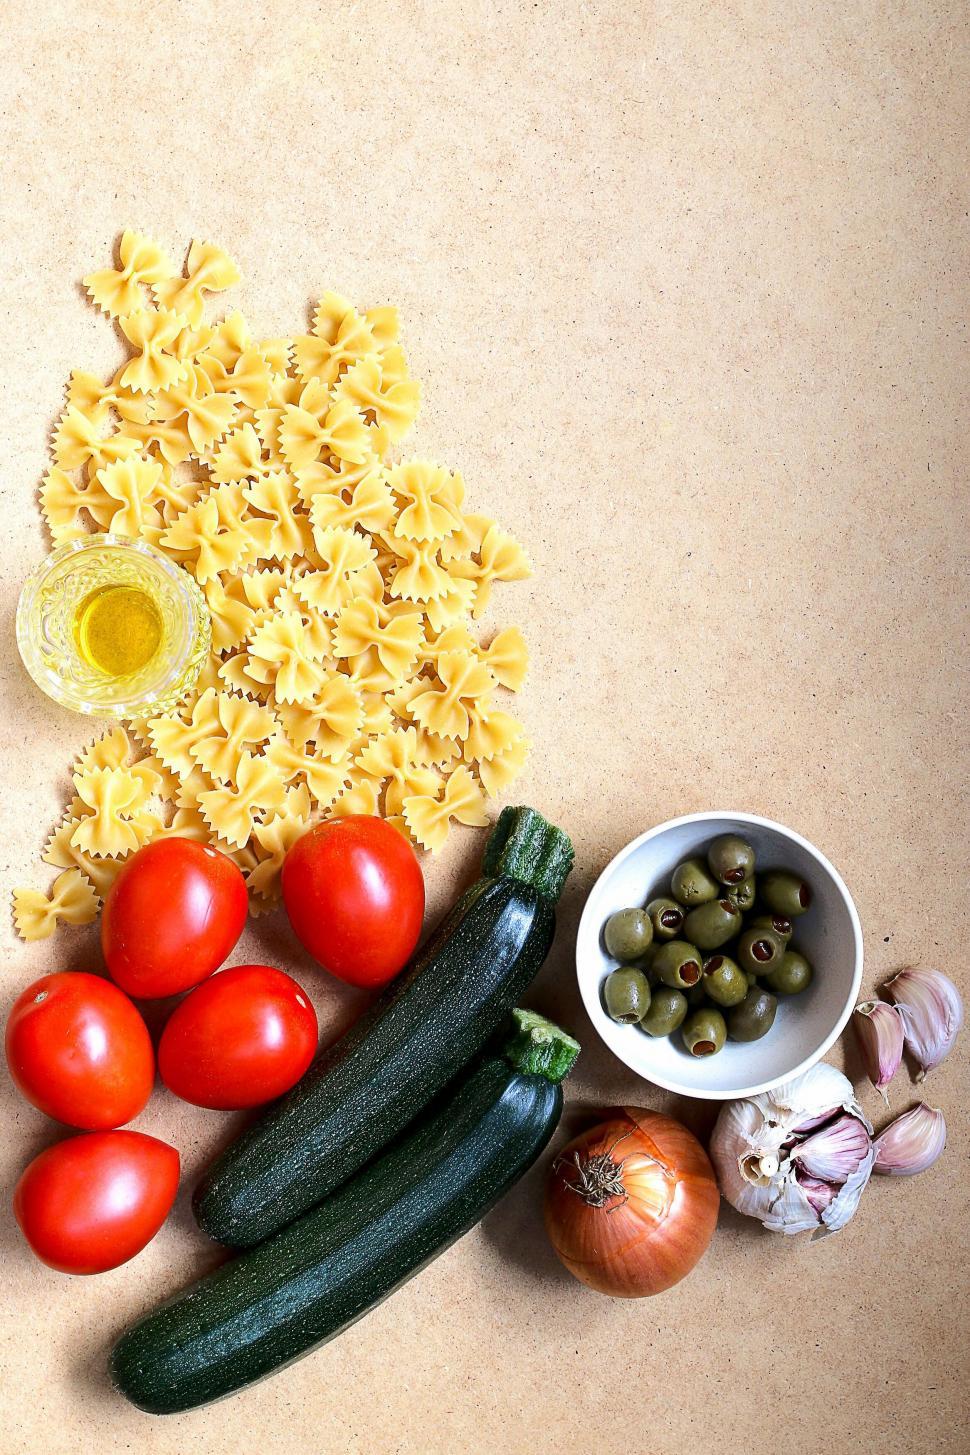 Free Image of Flat lay of vegetables and pasta on paper 